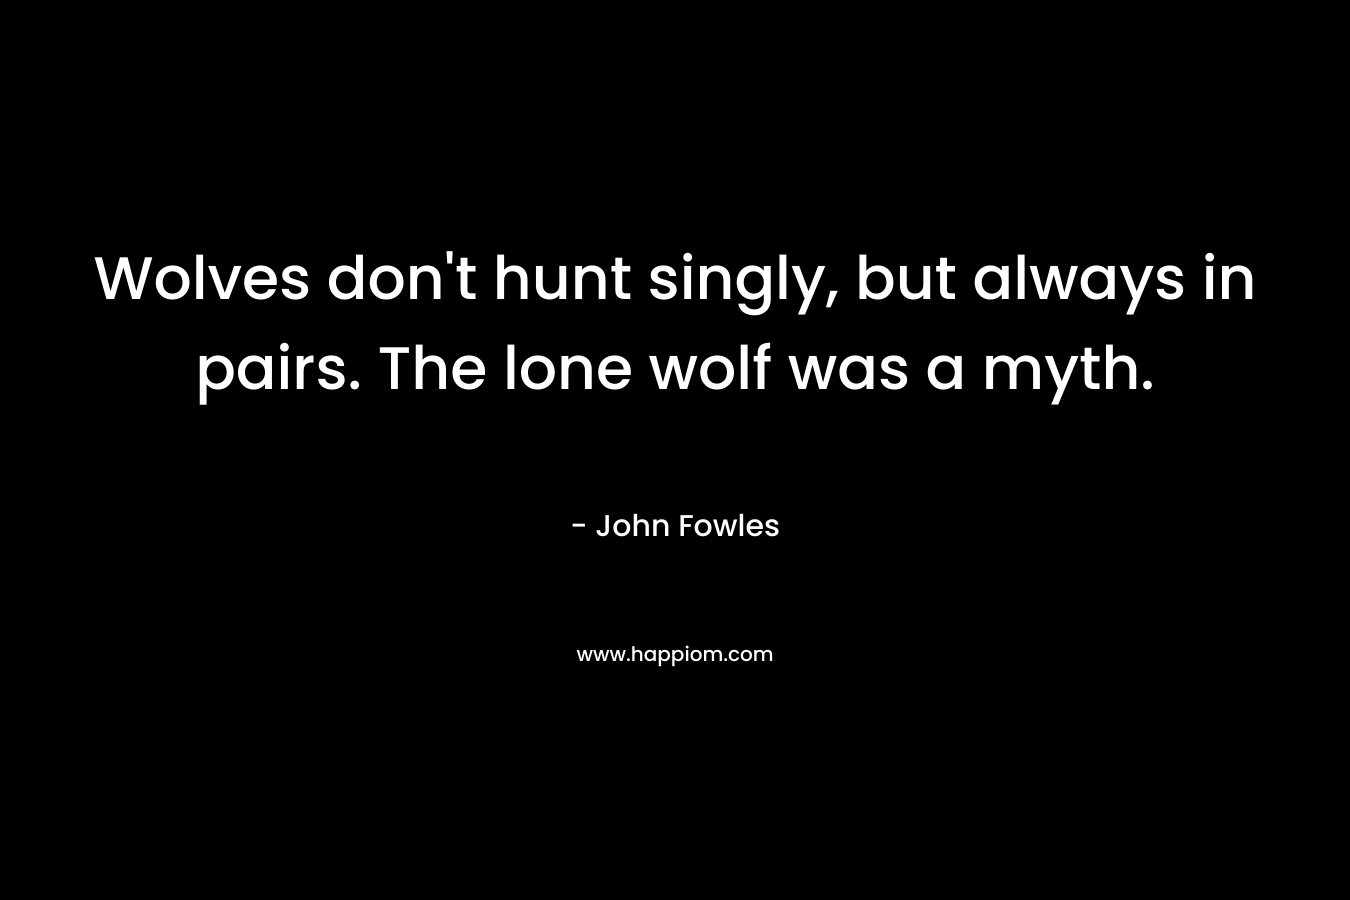 Wolves don’t hunt singly, but always in pairs. The lone wolf was a myth. – John Fowles